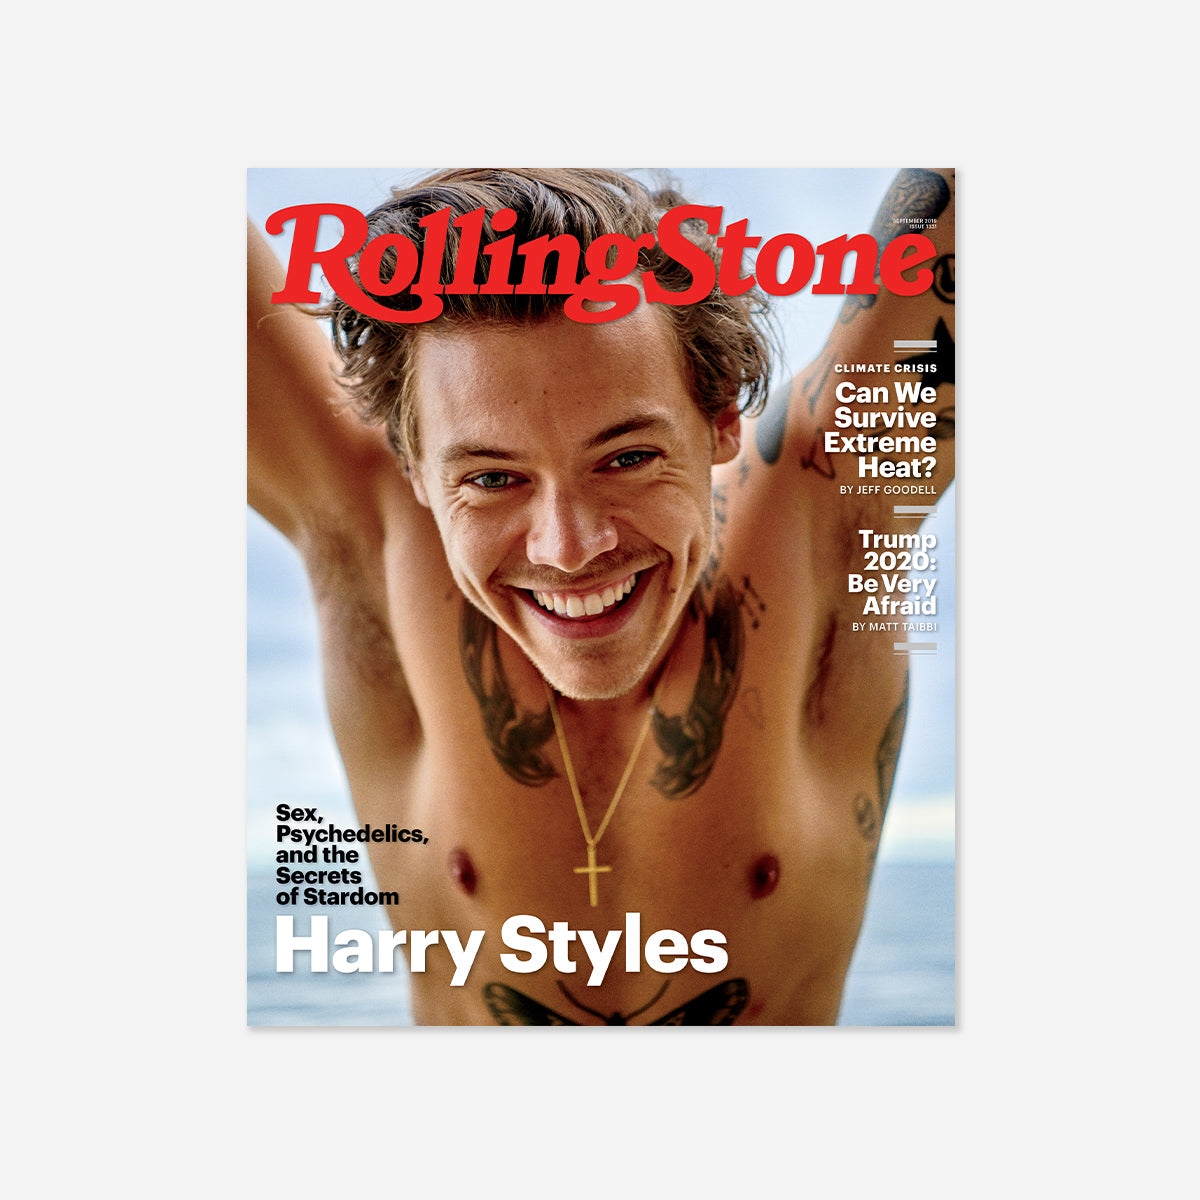 Rolling Stone Magazine September 2019 Featuring Harry Styles (Issue 1331)